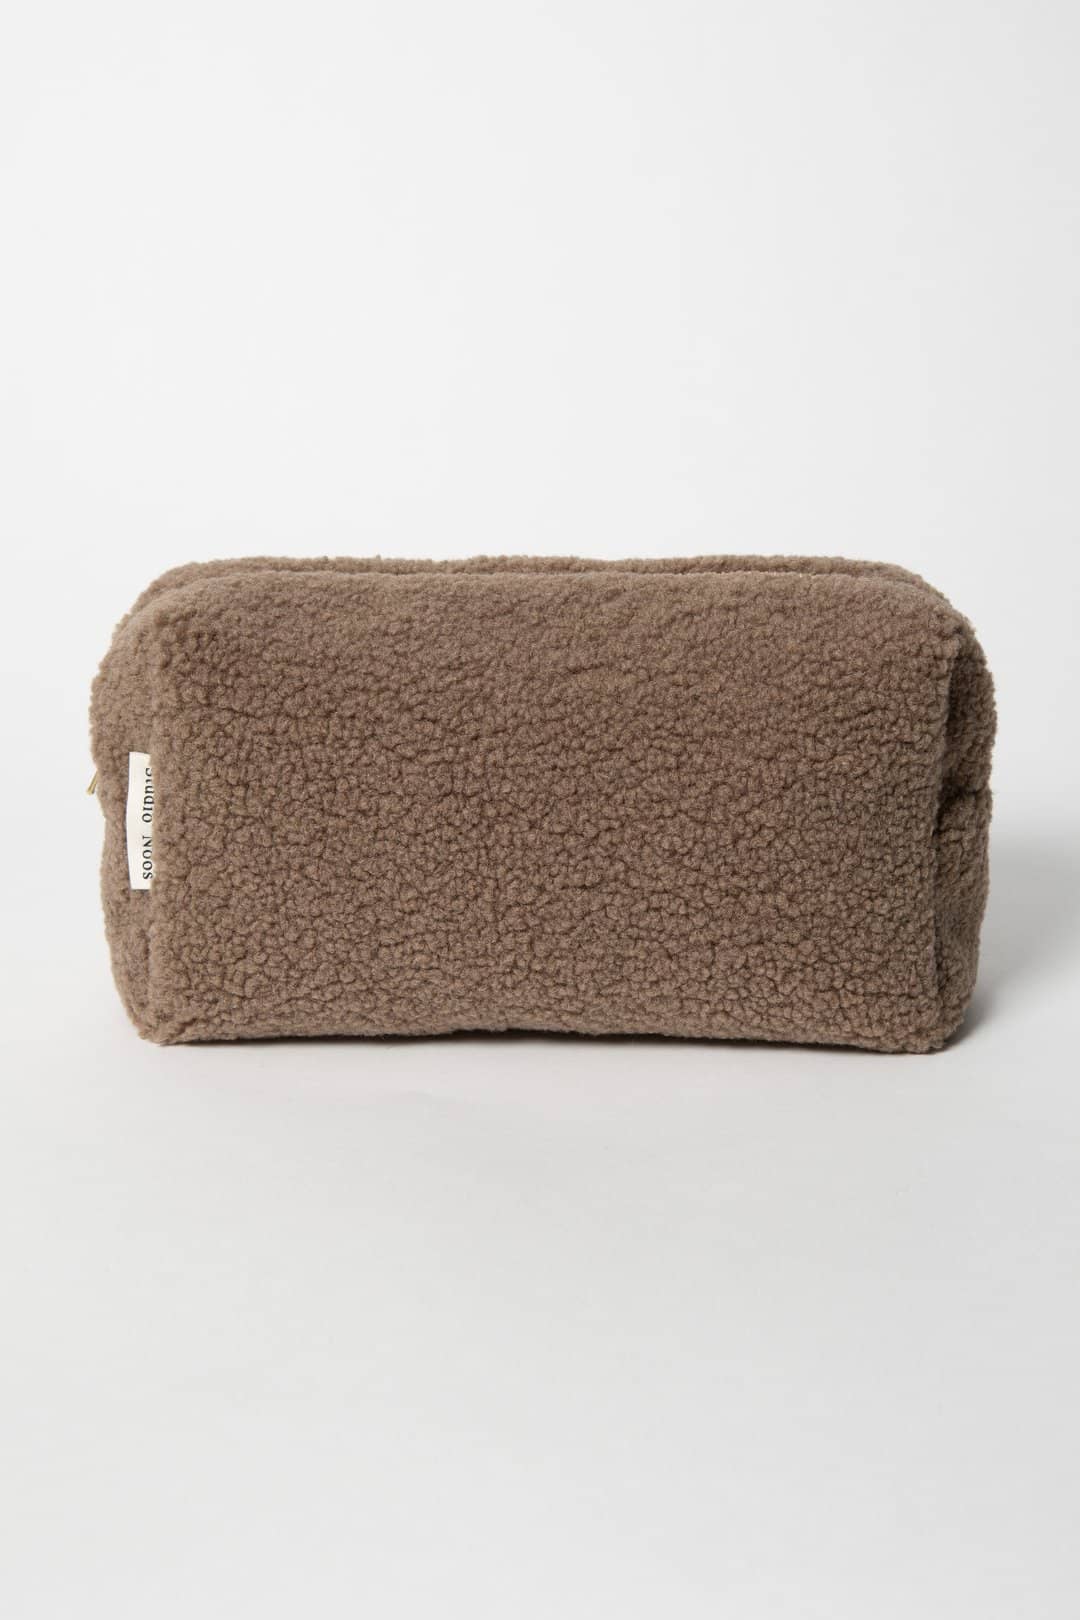 Studio Noos Chunky Pouch brown  - Hola BB